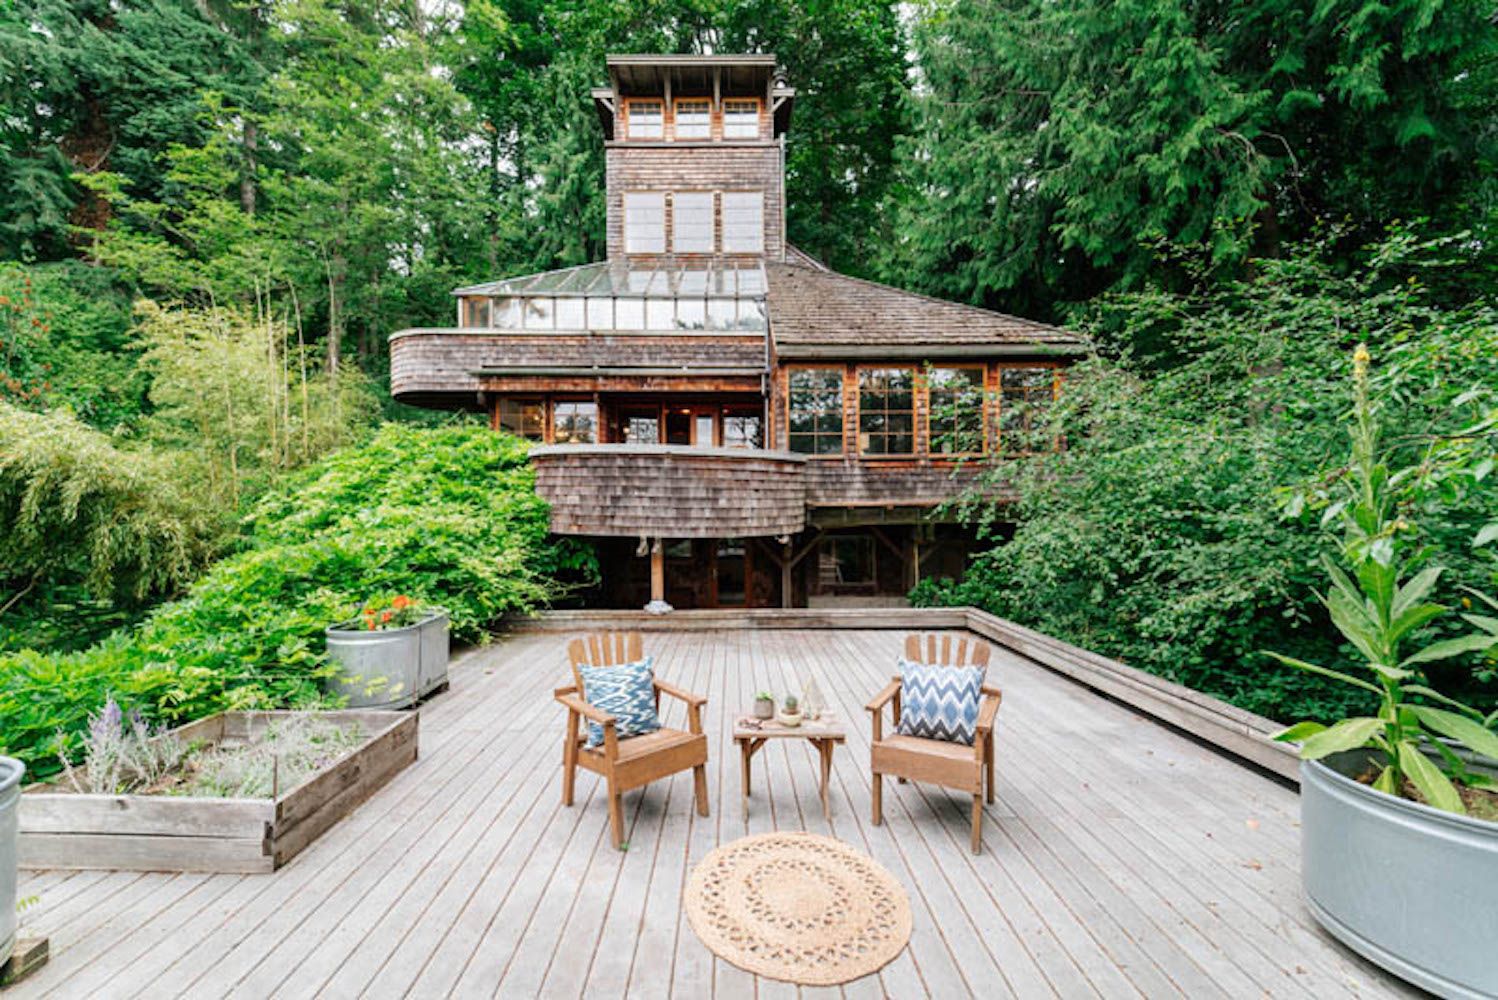 Dh ’ainmich Zillow Taigh na Bliadhna 2017 - agus It’s a 5-Story Treehouse